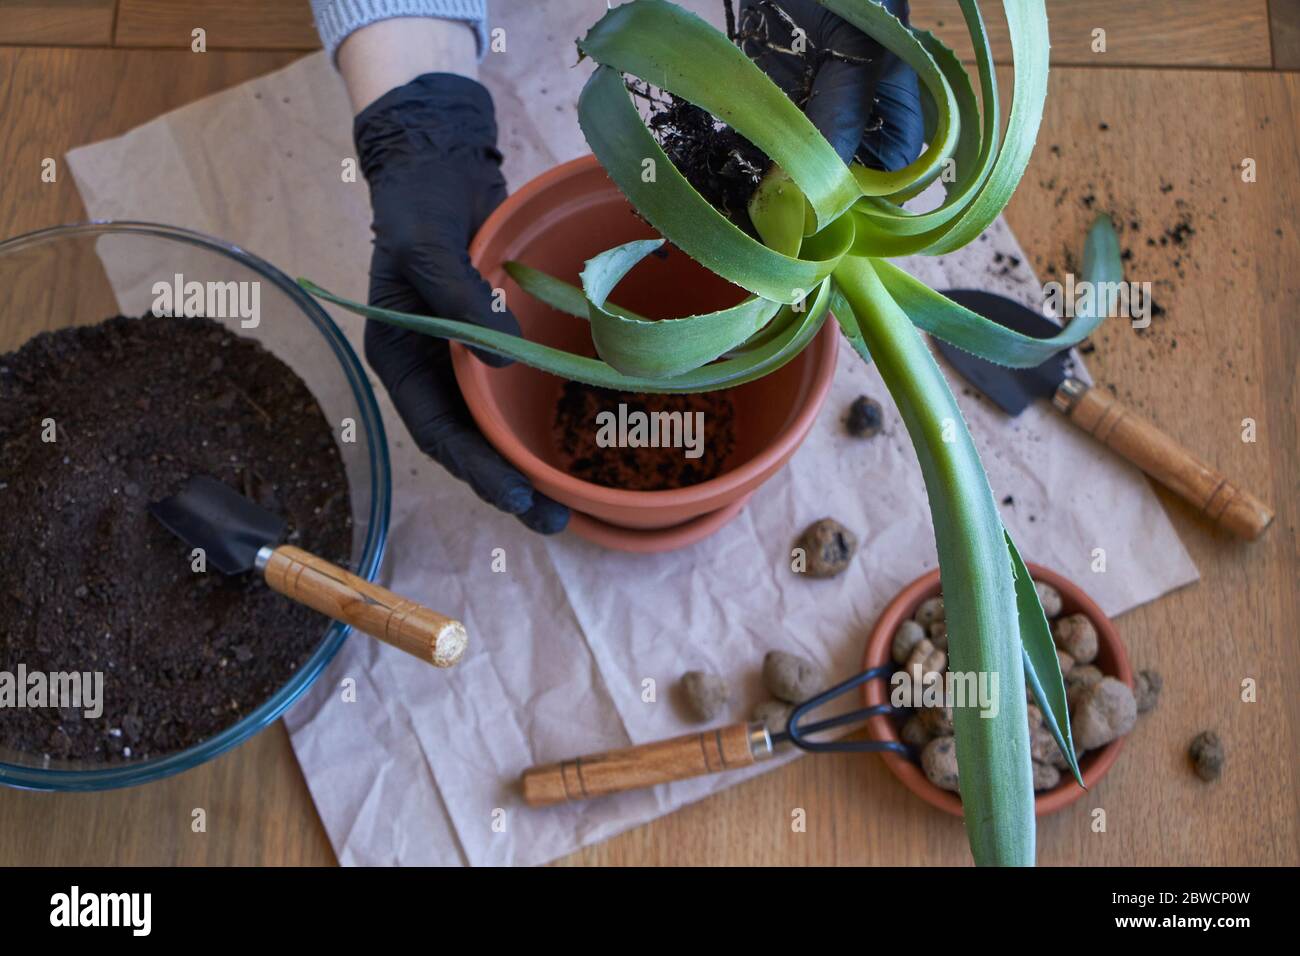 Step by step transplanting home plant aloe vera into clay flower pot, female hands transplant plant into home garden Stock Photo